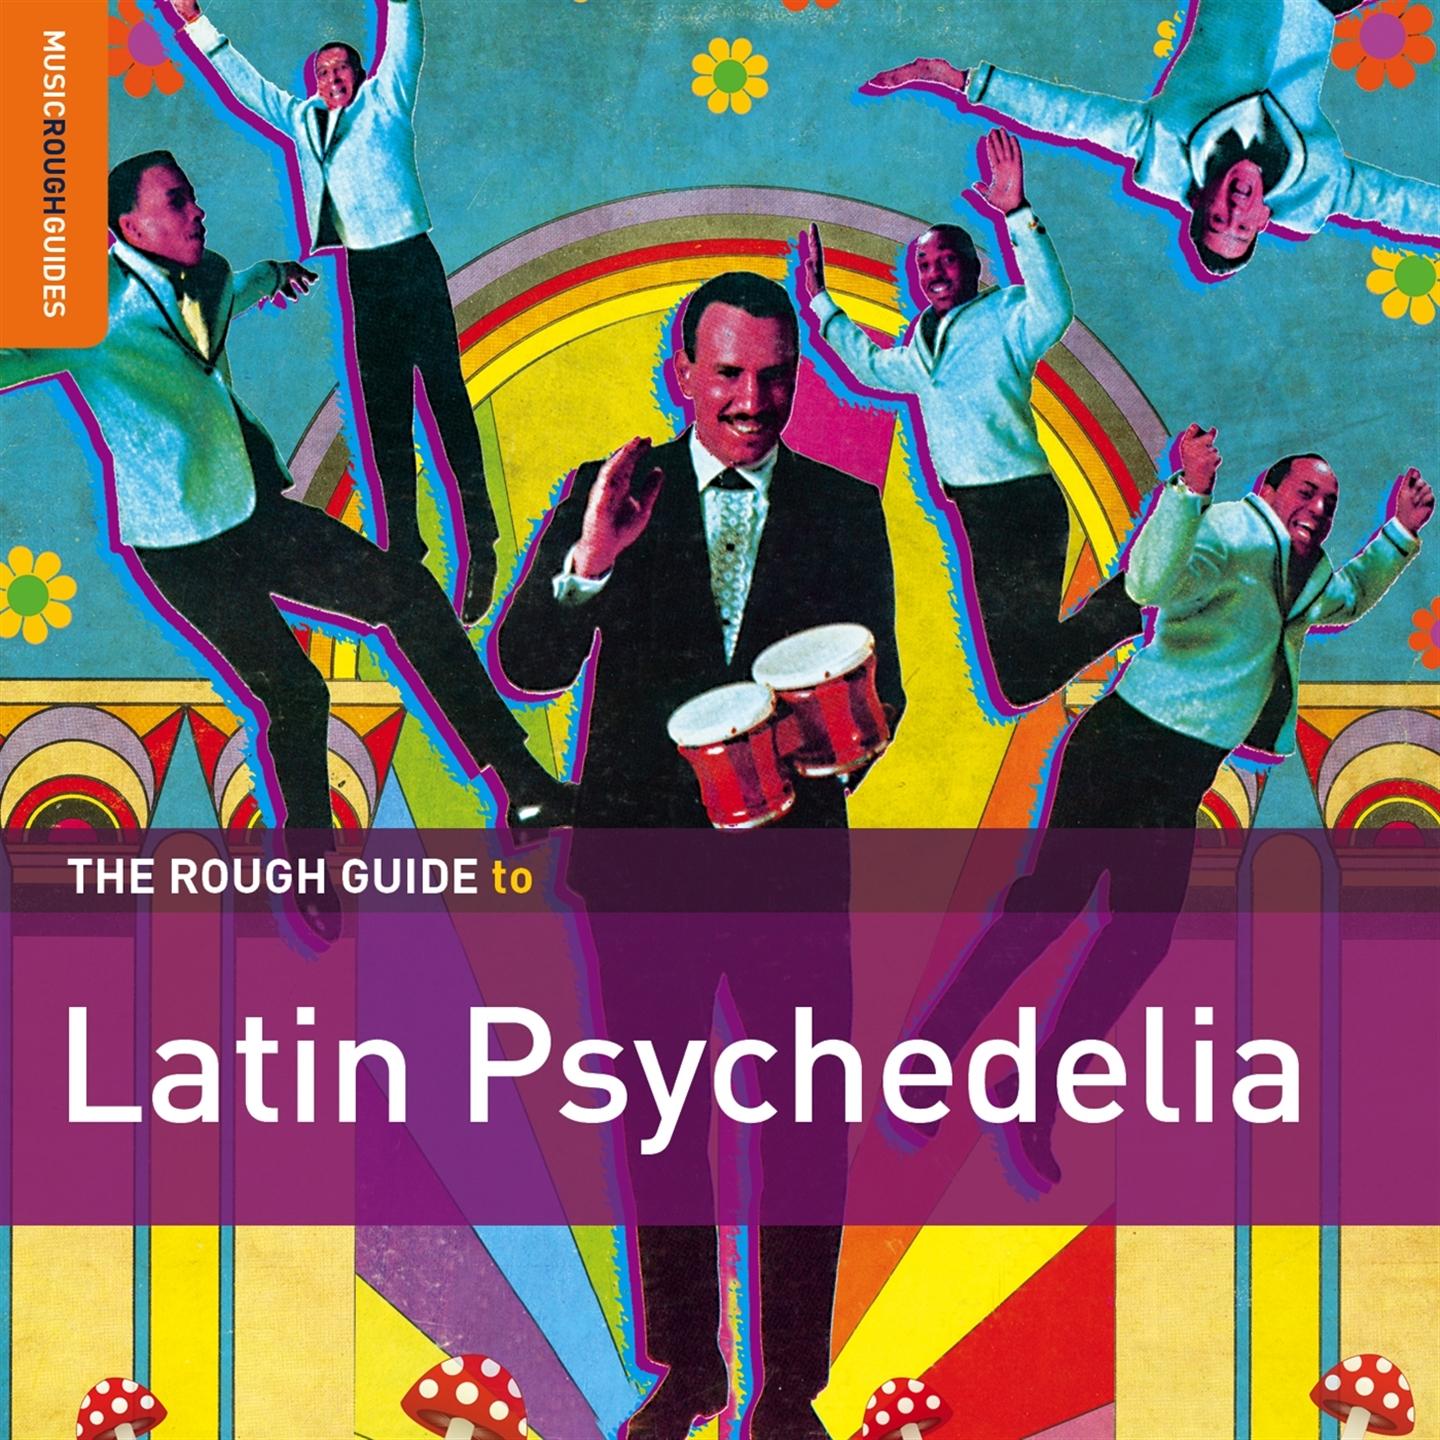 THE ROUGH GUIDE TO LATIN PSYCHEDELIA